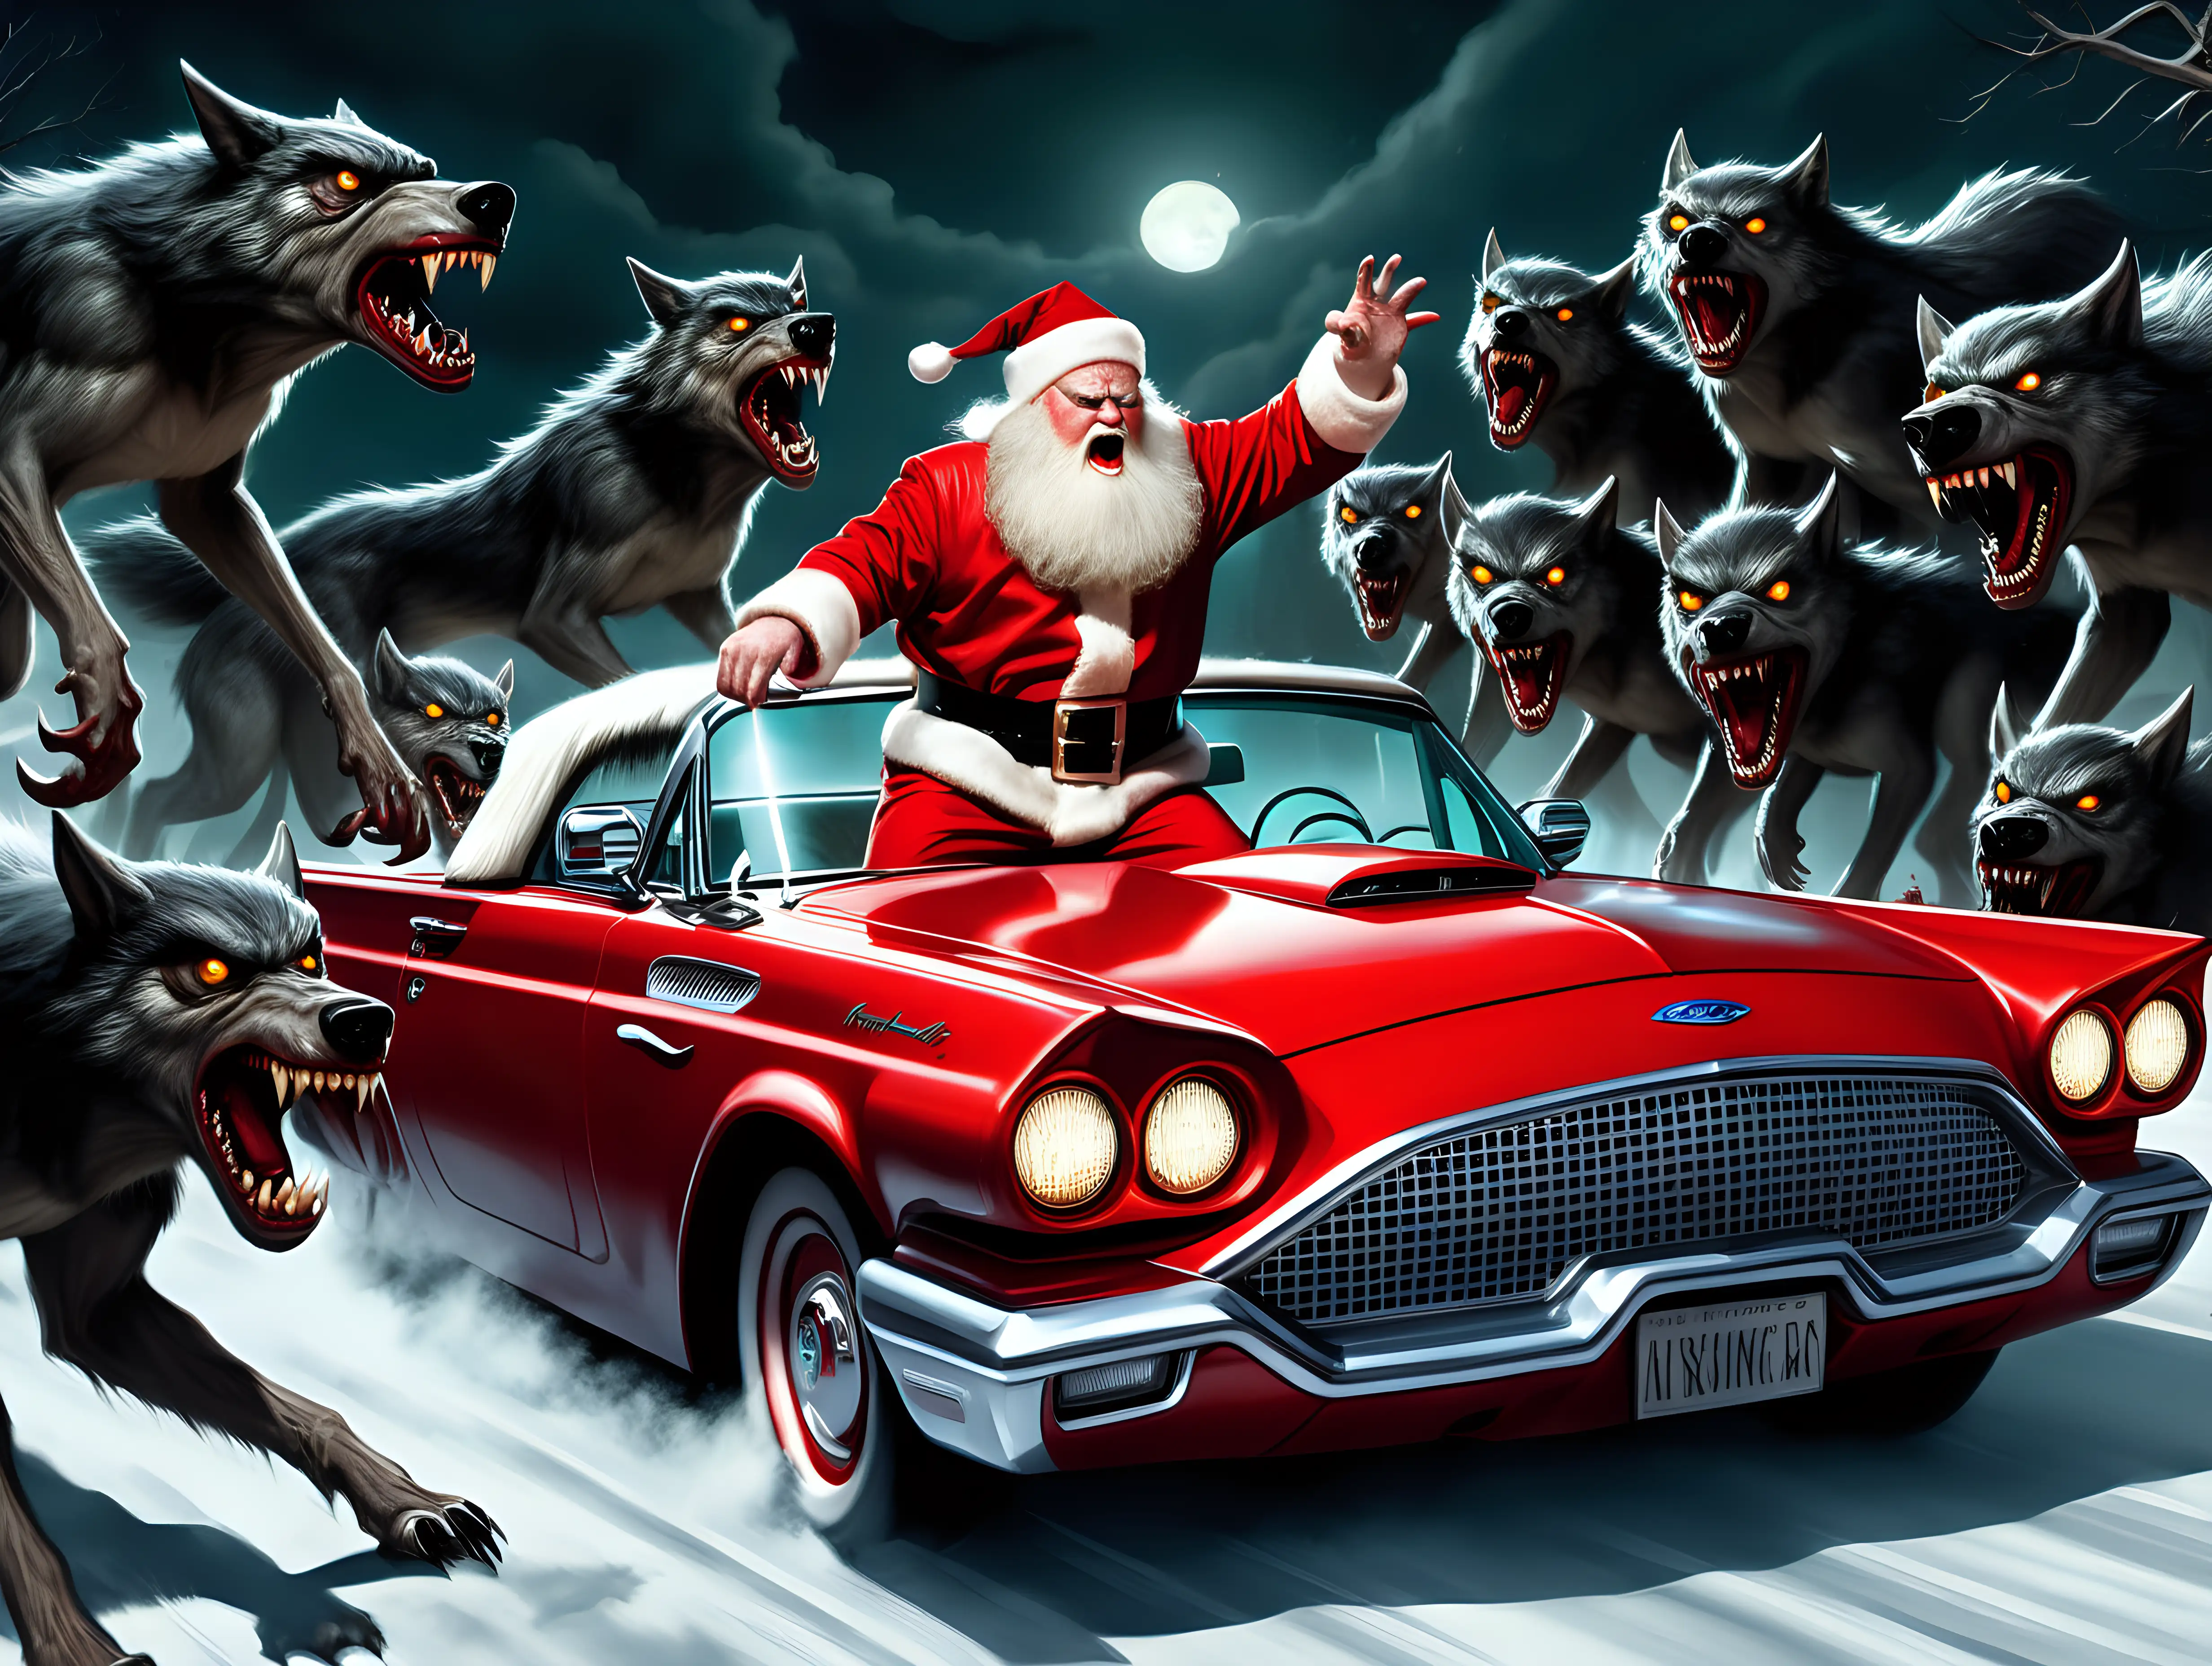  Kris Kringle in a Ford Thunderbird fighting a horde of werewolves